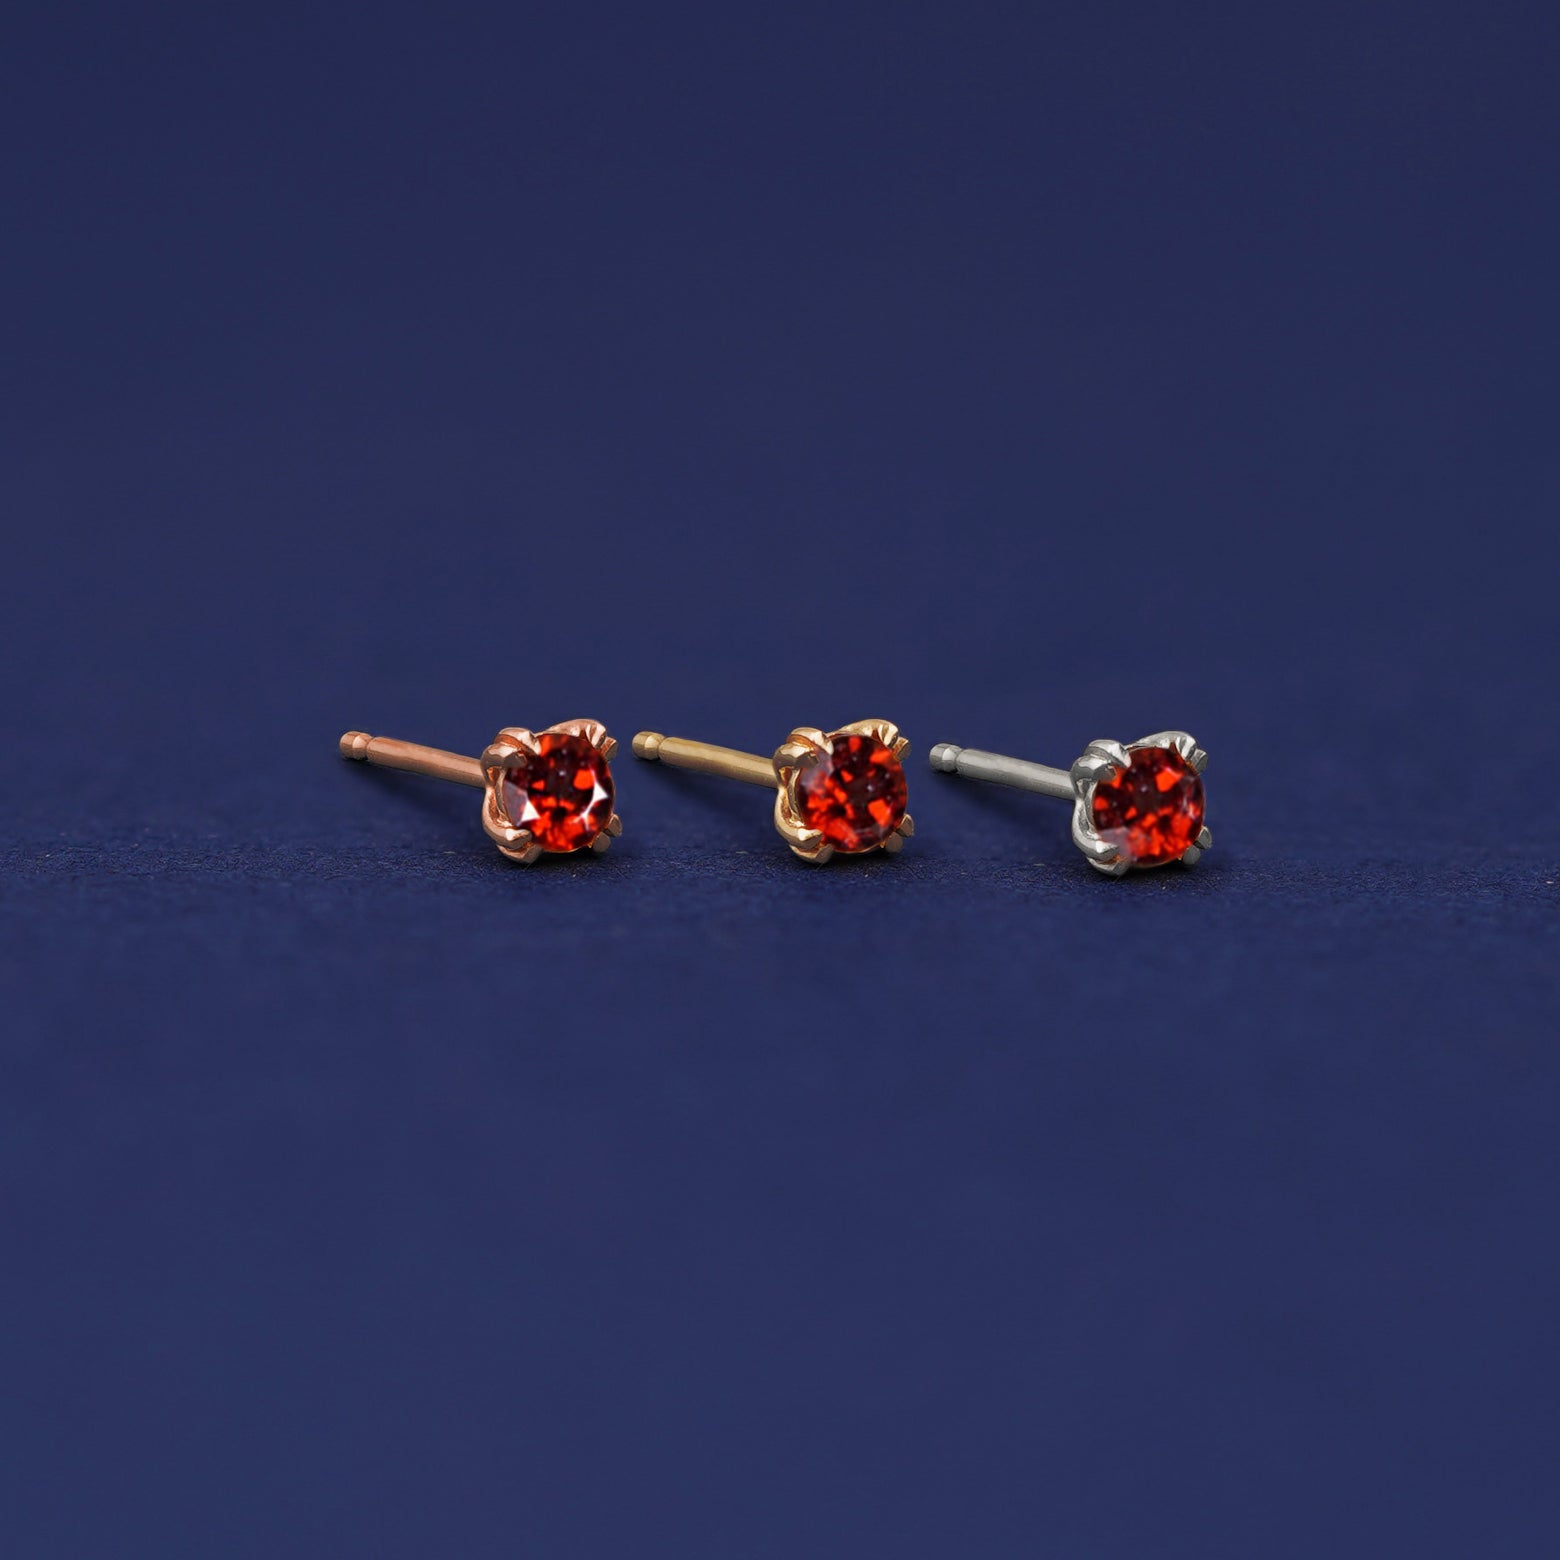 Three versions of the Garnet Earring shown in options of rose, yellow, and white gold